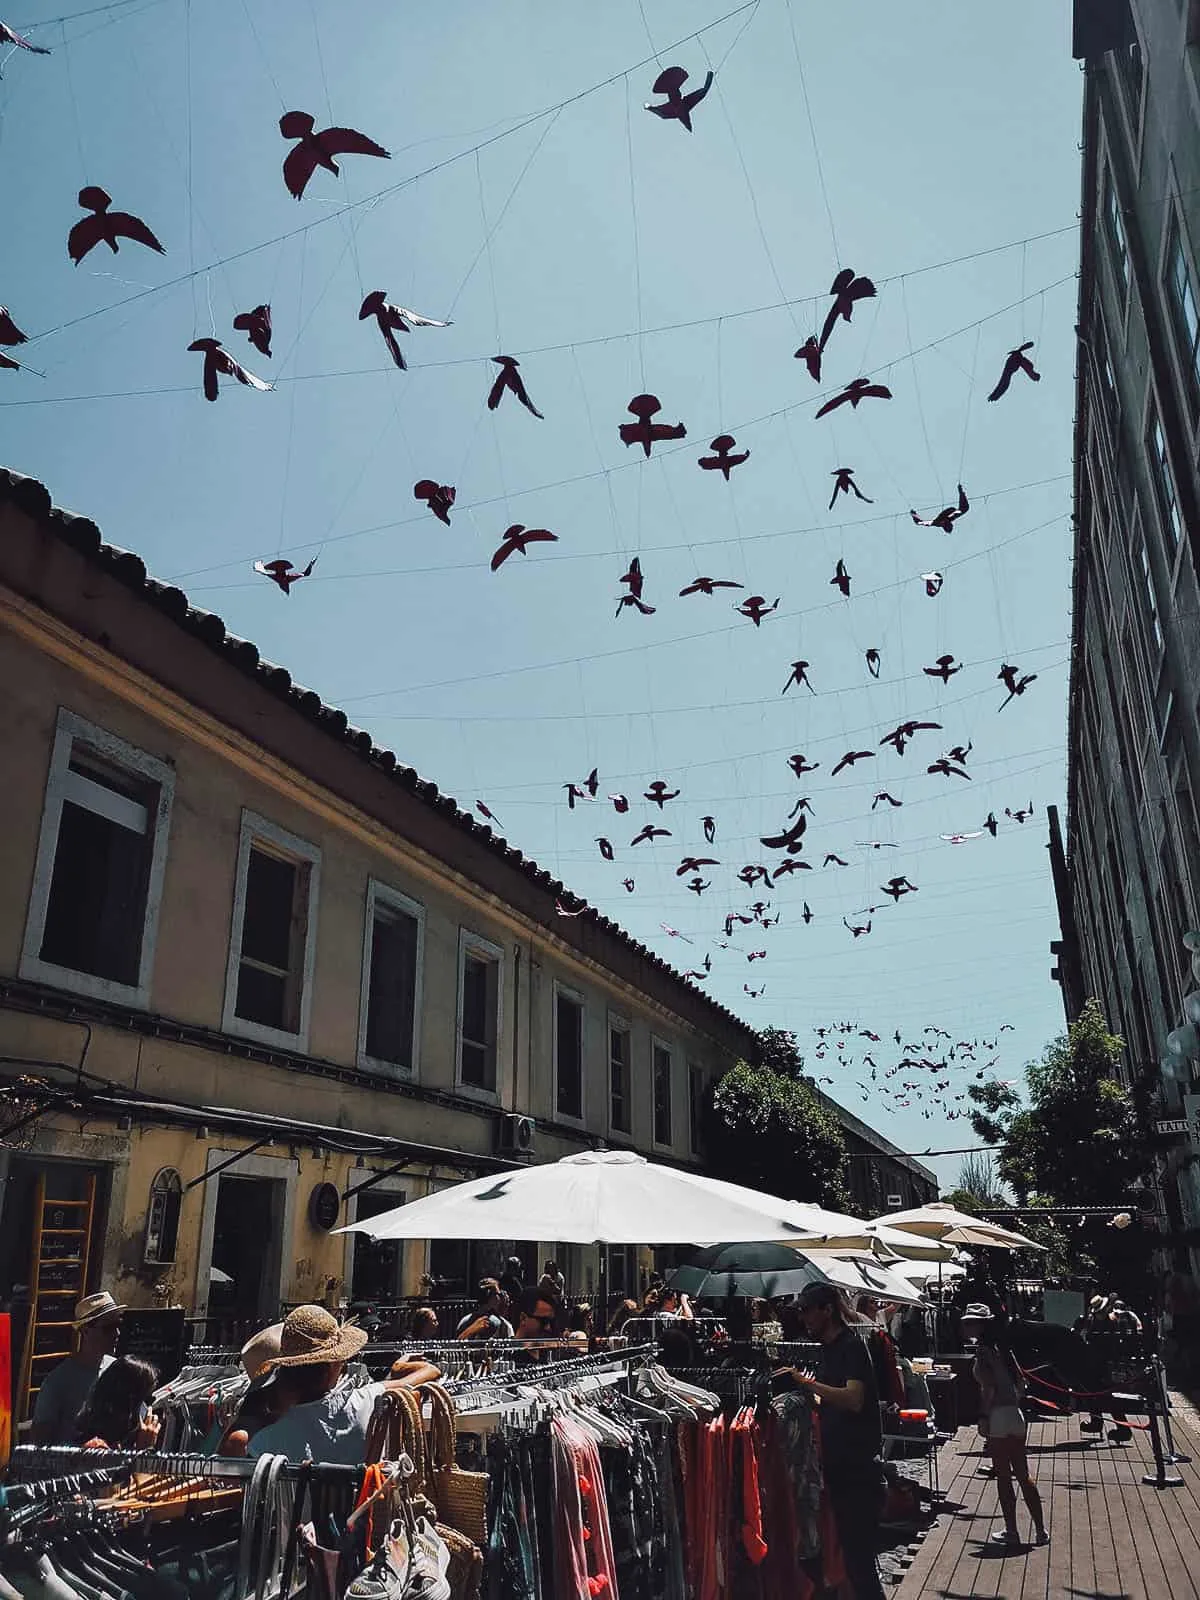 Hanging birds over clothing stalls